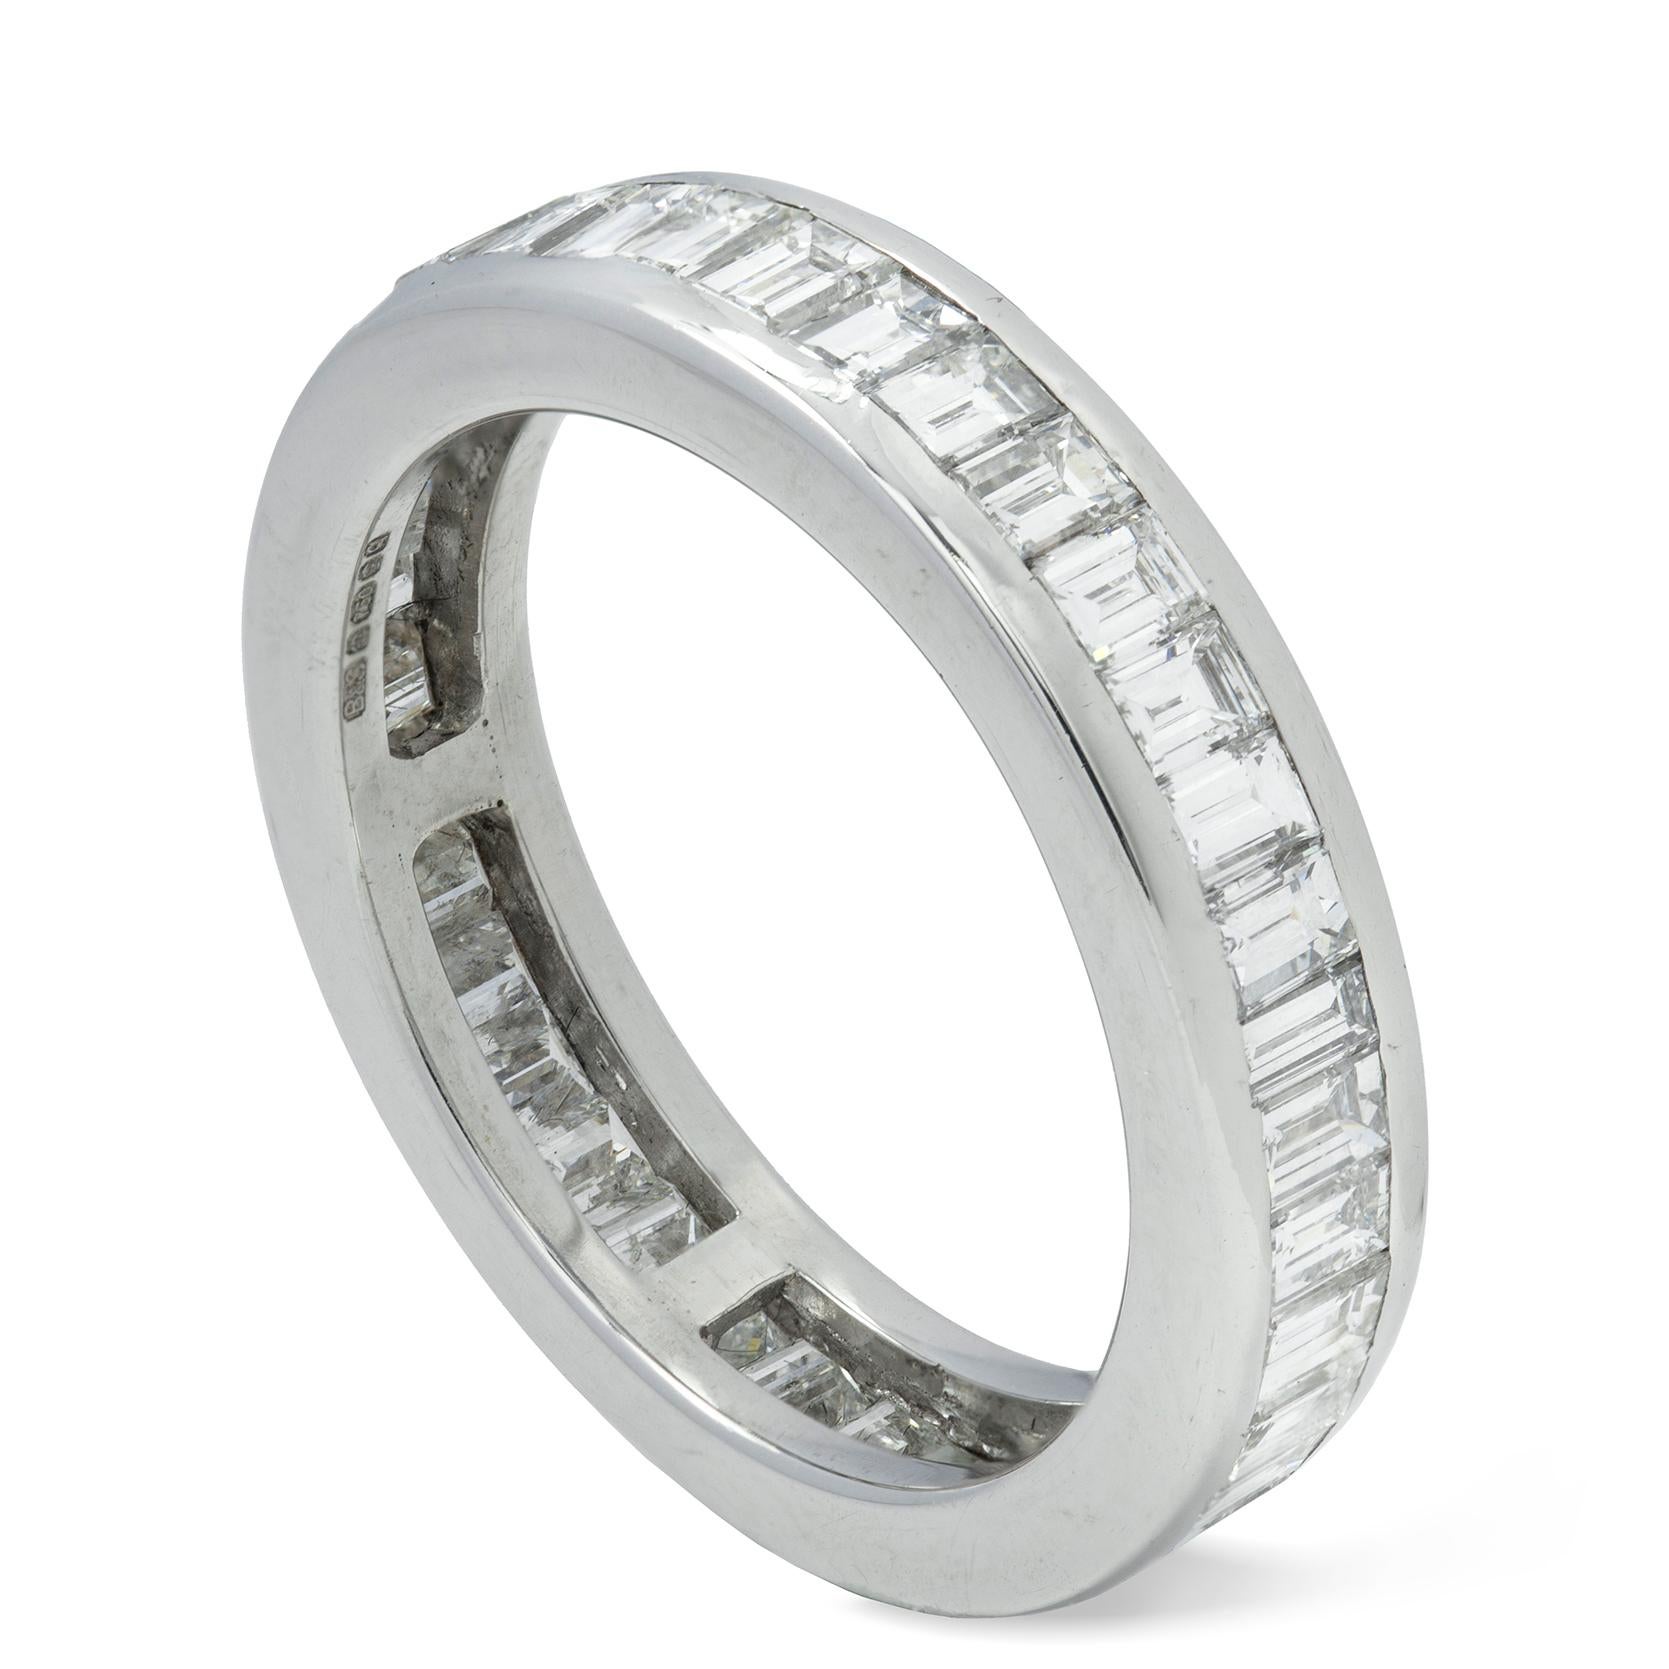 A baguette-cut diamond full eternity ring, the thirty eight baguette-cut diamonds estimated to weigh a total of 3.4 carats, channel set in white gold mount, hallmarked 18ct gold London 2015, bearing the Bentley and Skinner sponsor mark, finger size